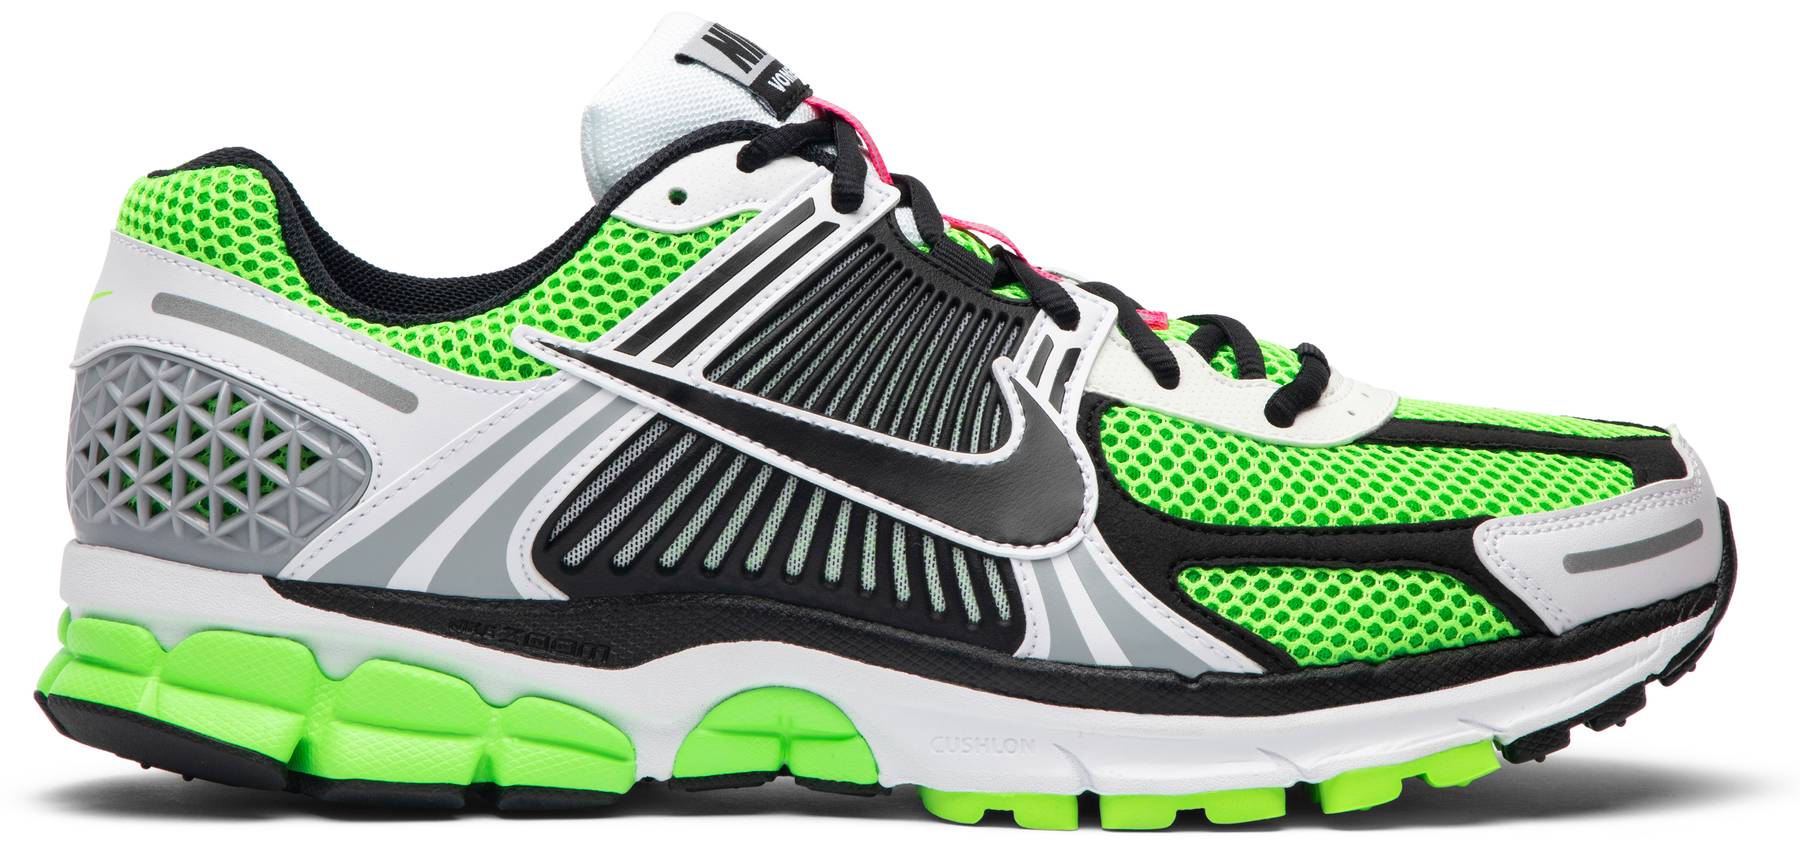 Air Zoom Vomero 5 SE SP 'Lime Green' - Nike - CI1694 300 | GOAT